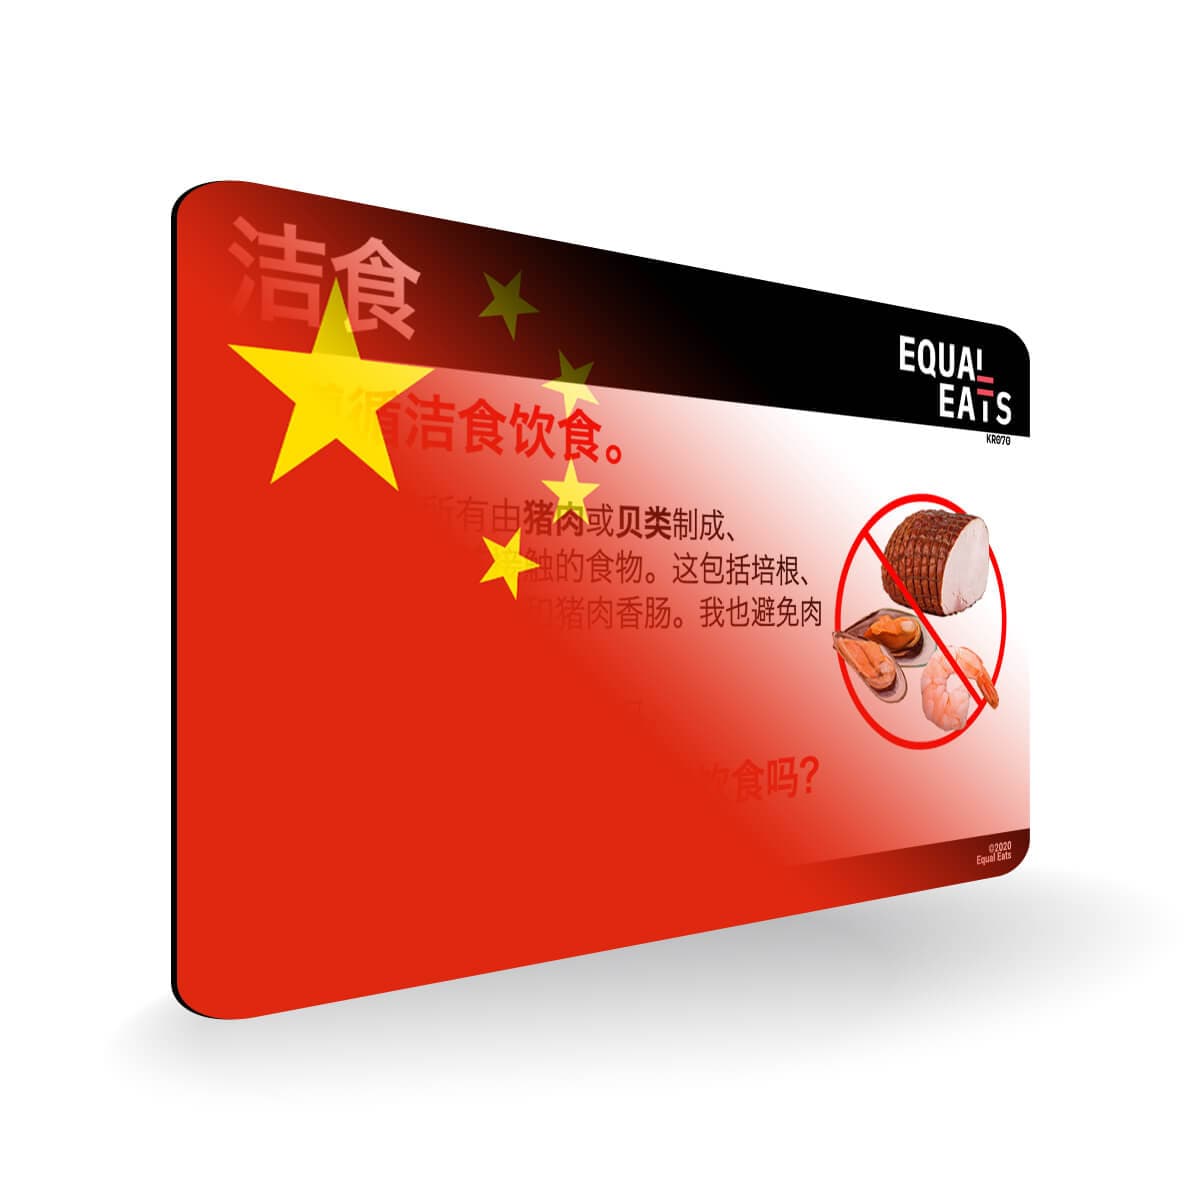 Kosher Diet in Simplified Chinese. Kosher Card for China